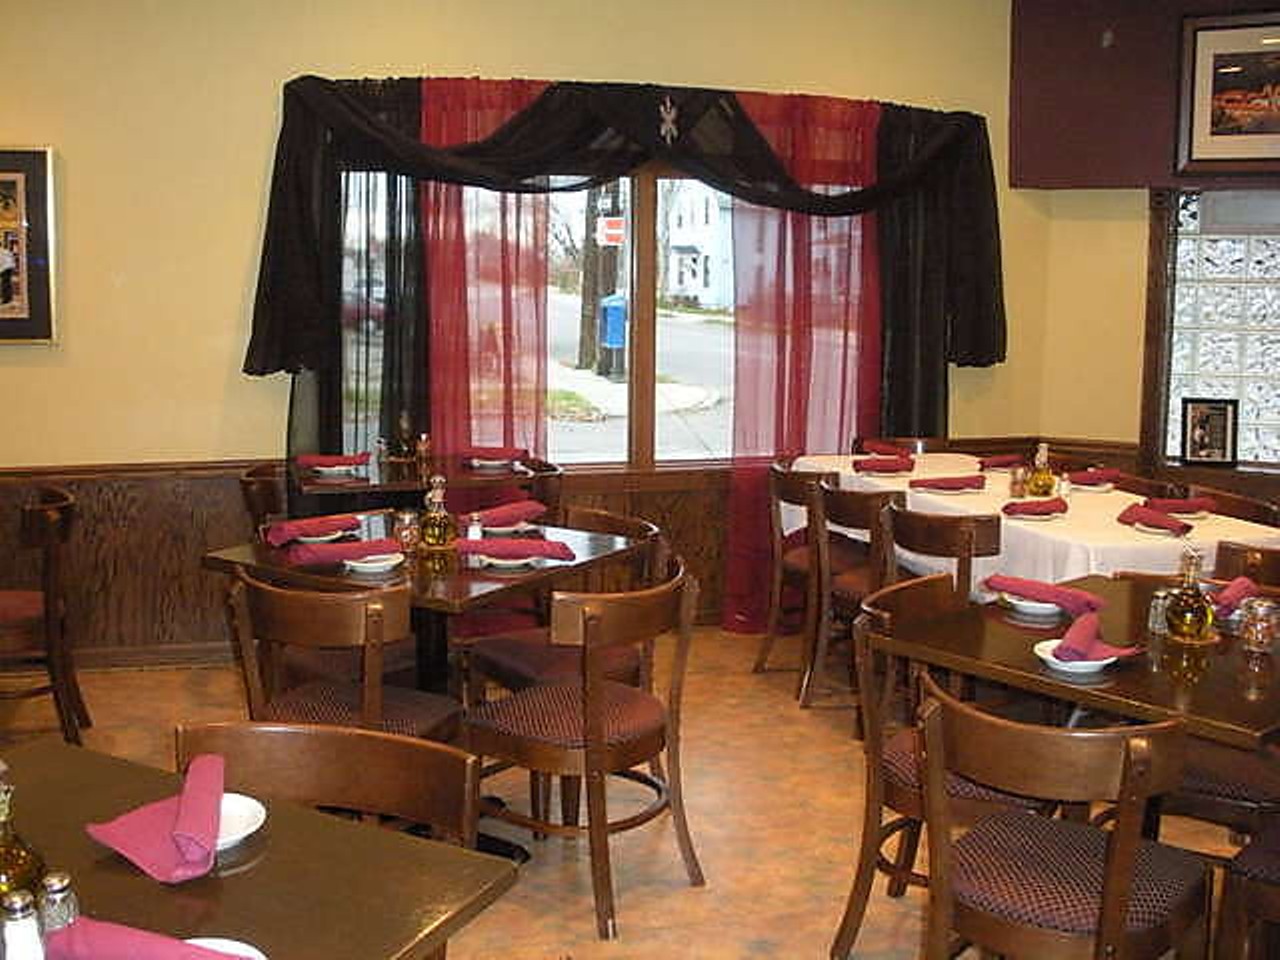 Bruno's Ristorante:
Tucked away on West 41st street, this Italian Cleveland ristorante will be a romantic home run for your V-Day dinner. Call (216) 961-7087 for more info. (Photo via Urban Spoon, William Crowell)